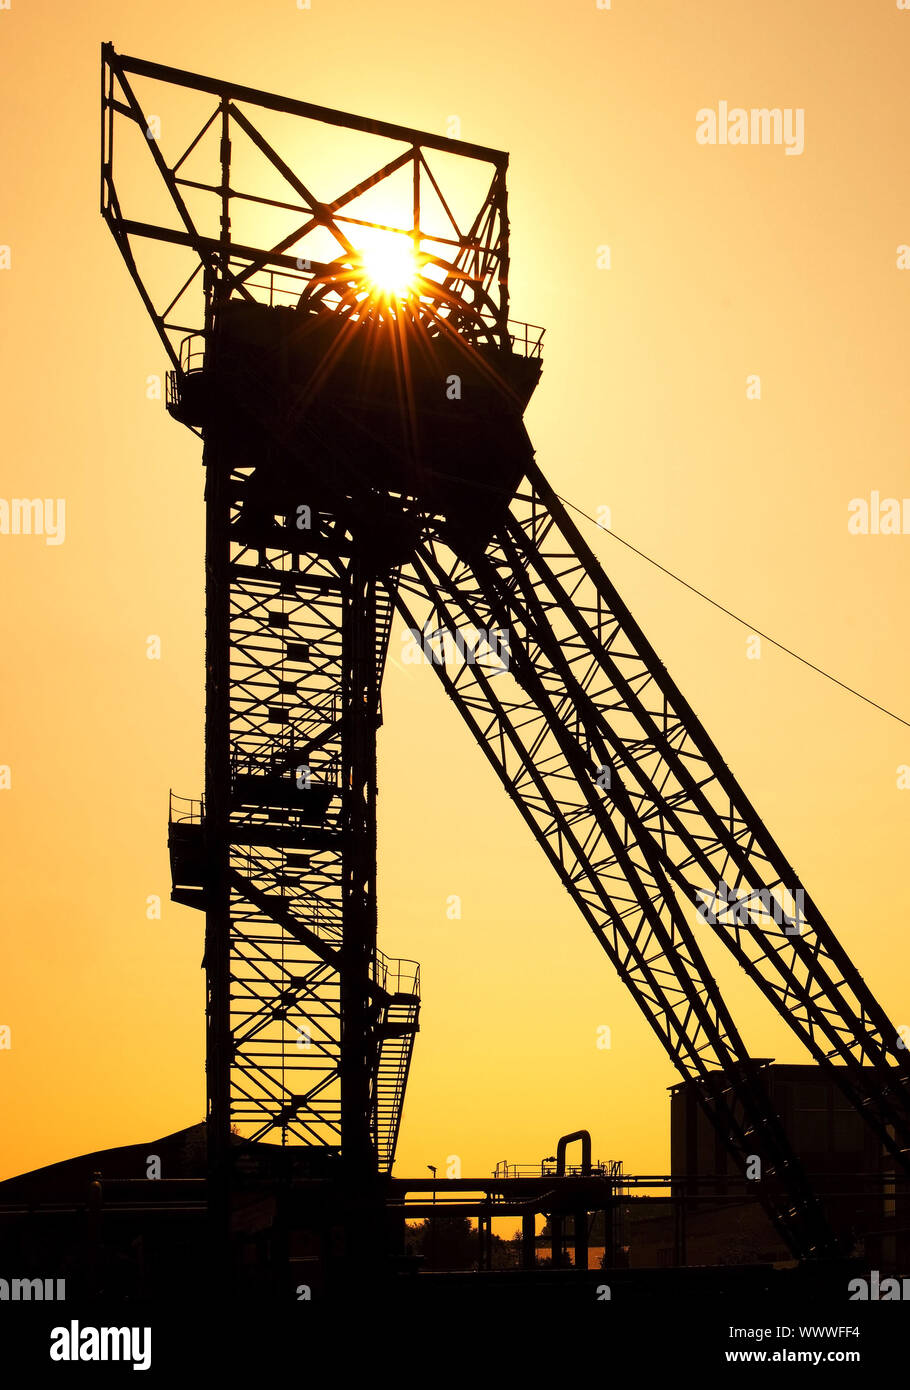 headframe of the colliery Auguste Victoria shaft 1/2, Marl, Ruhr Area, Germany, Europe Stock Photo